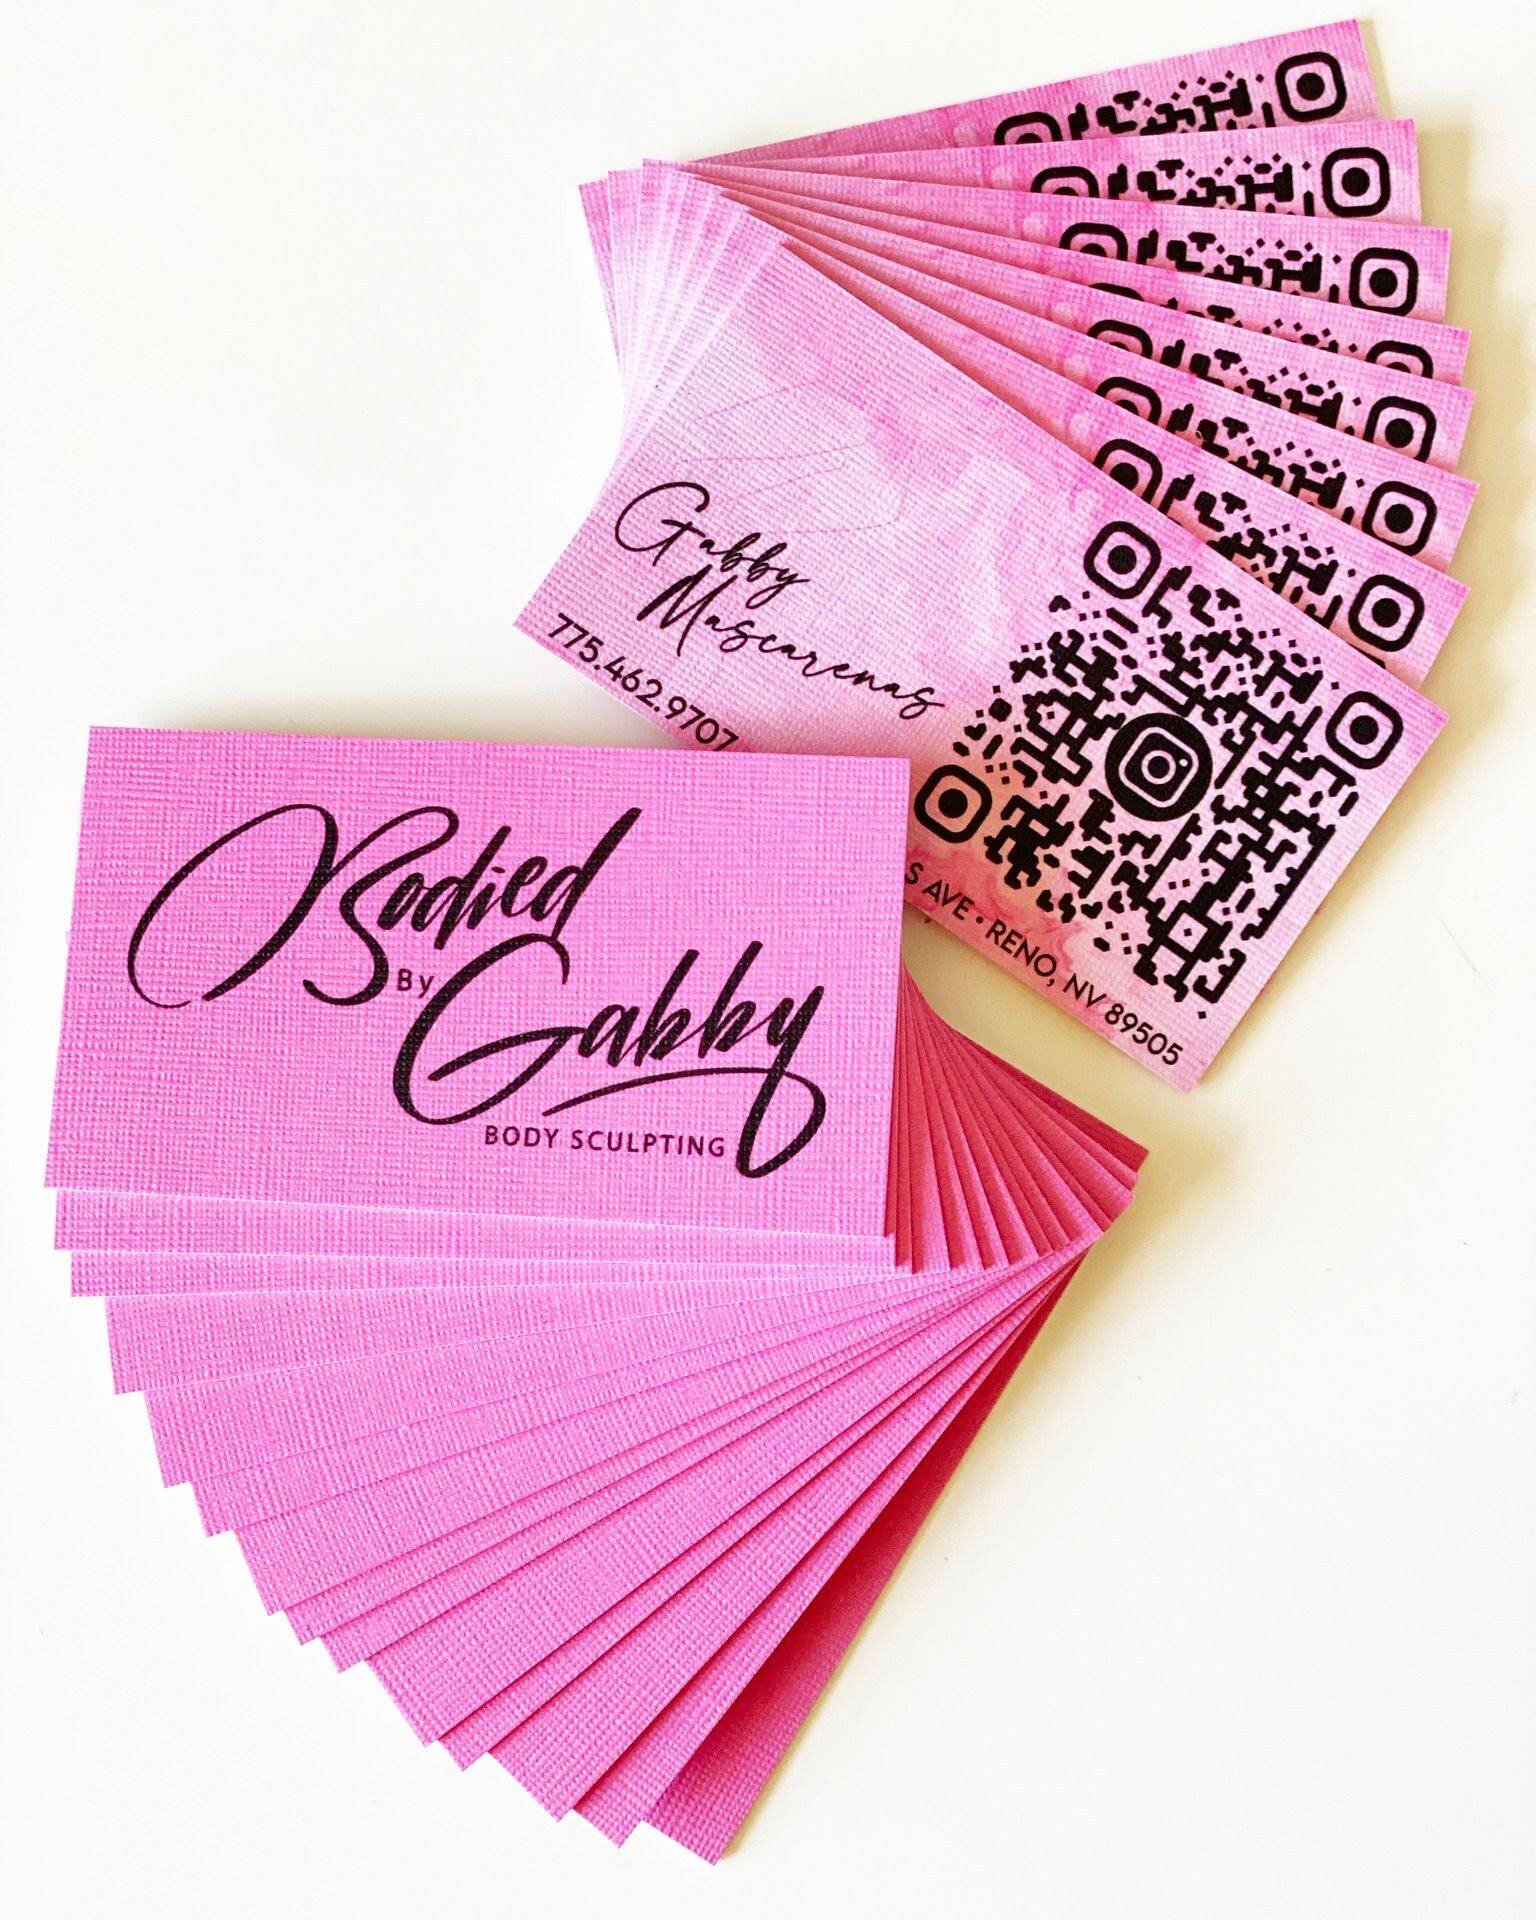 There are SO many options for business cards now. From shape or size, to special finishes like foils or spot gloss, to the material itself.

I love how these linen cards for @bodiedbygabby turned out!

And don't forget that business cards are part of